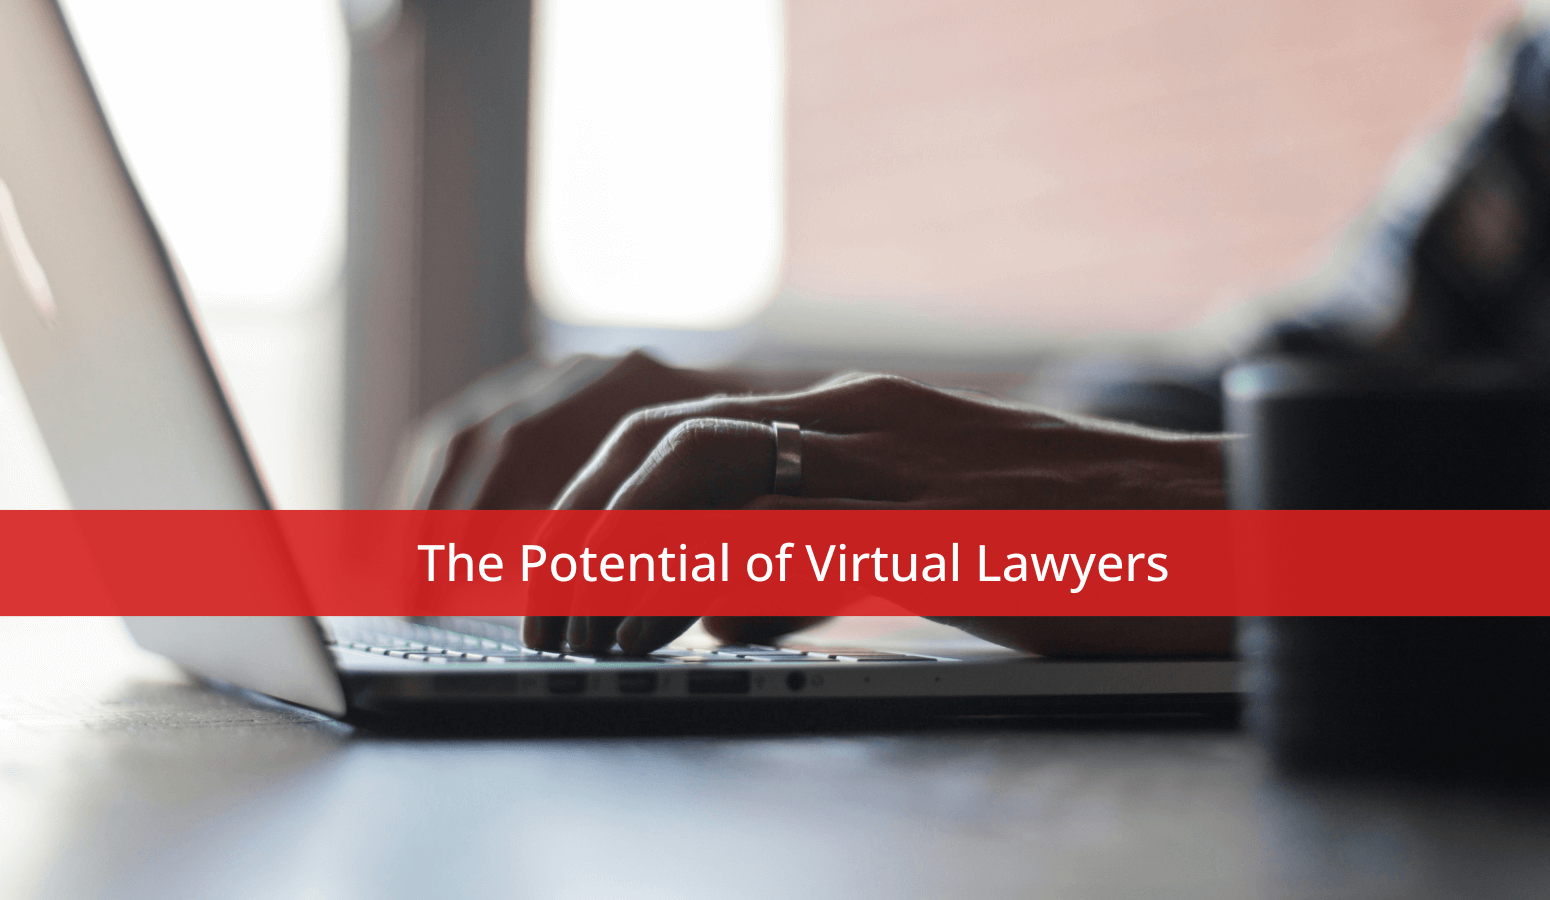 Featured image for “The Potential of Virtual Lawyers”